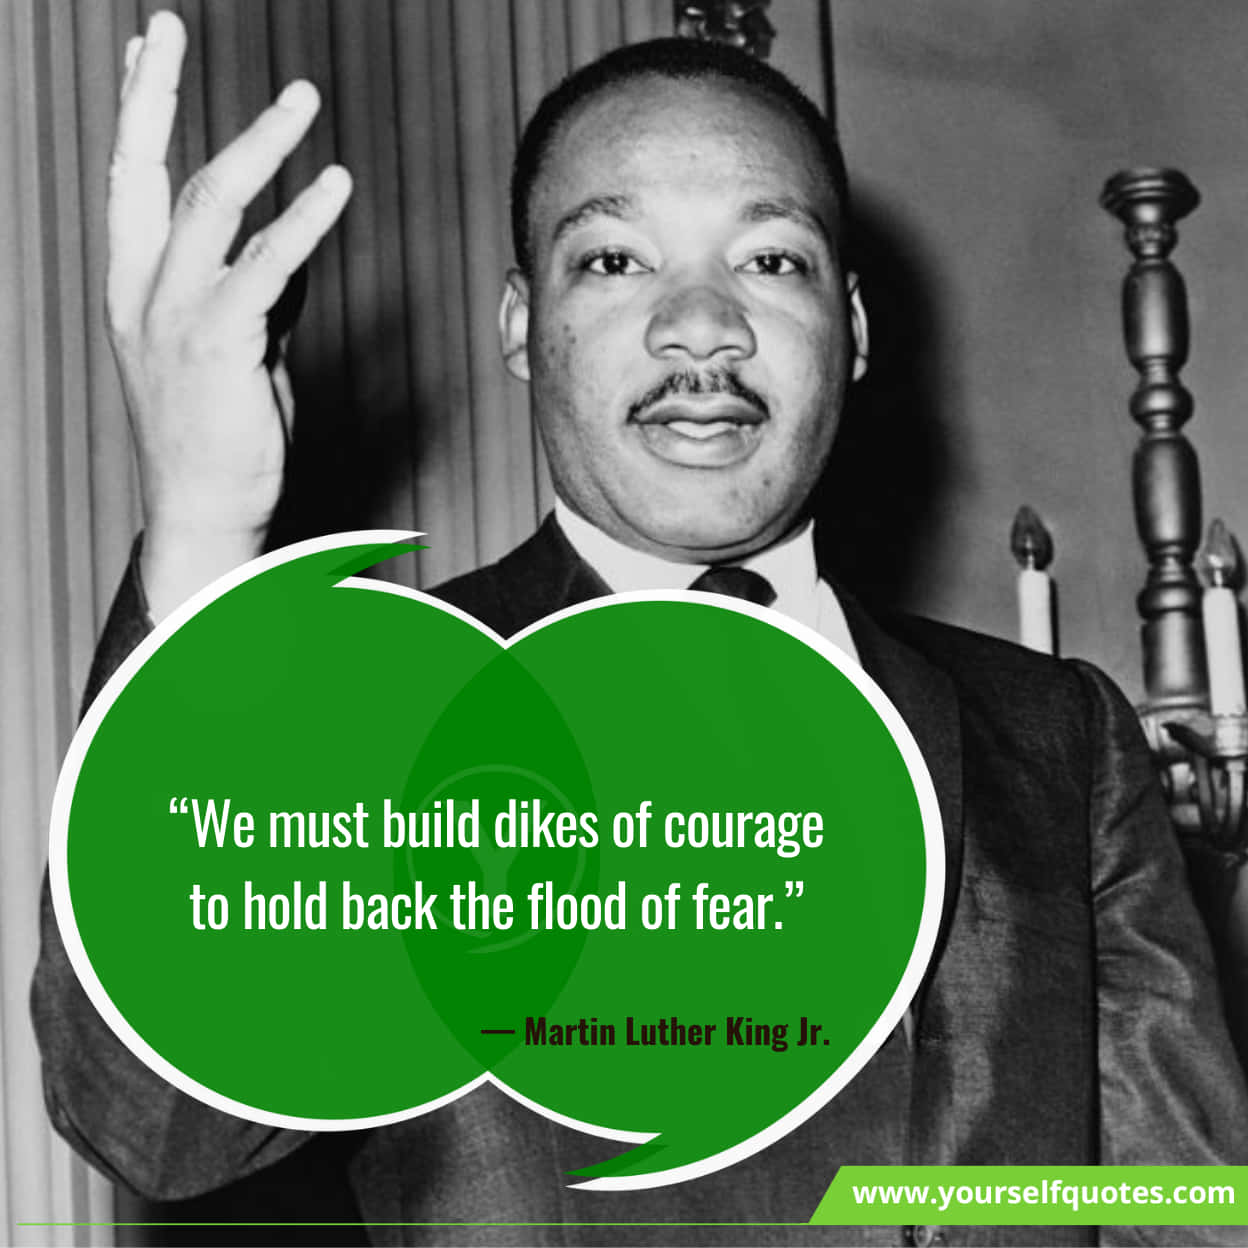 Martin Luther King Jr Inspiring Quotes